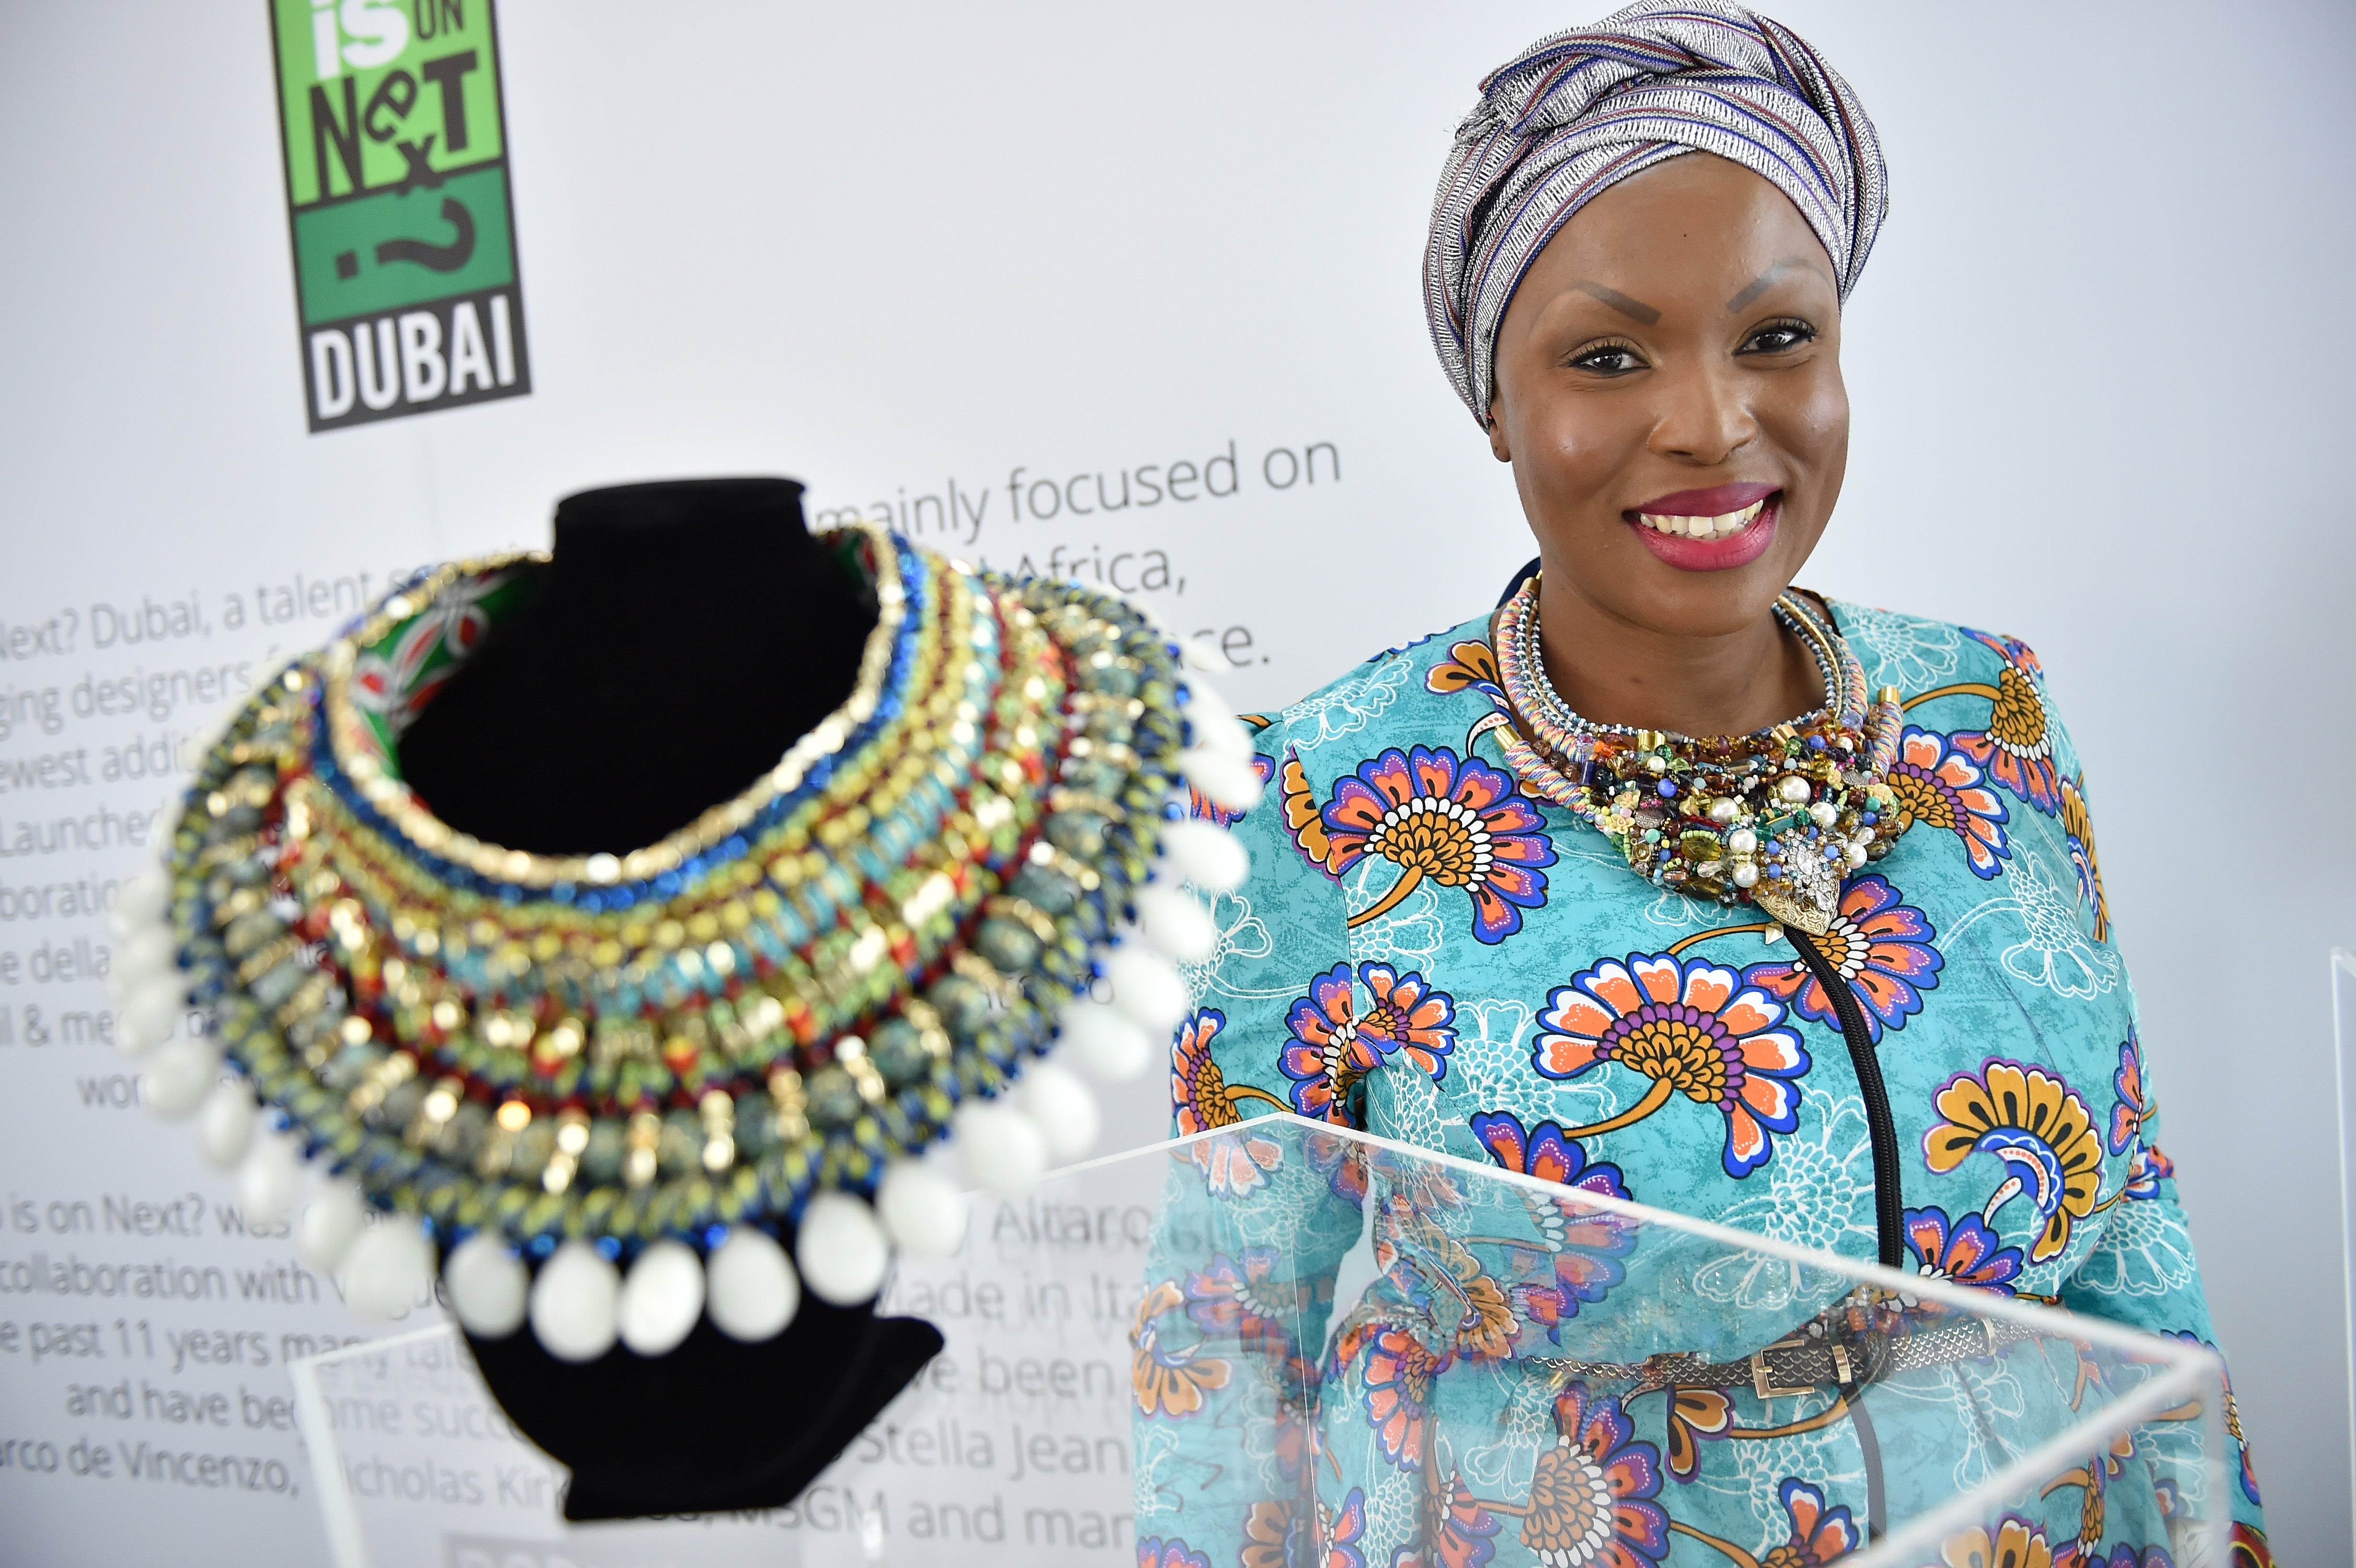 Designer Anita Quansah Has Outfitted Alicia Keys, Nicki Minaj & More In Her Pieces Inspired By African Royalty
